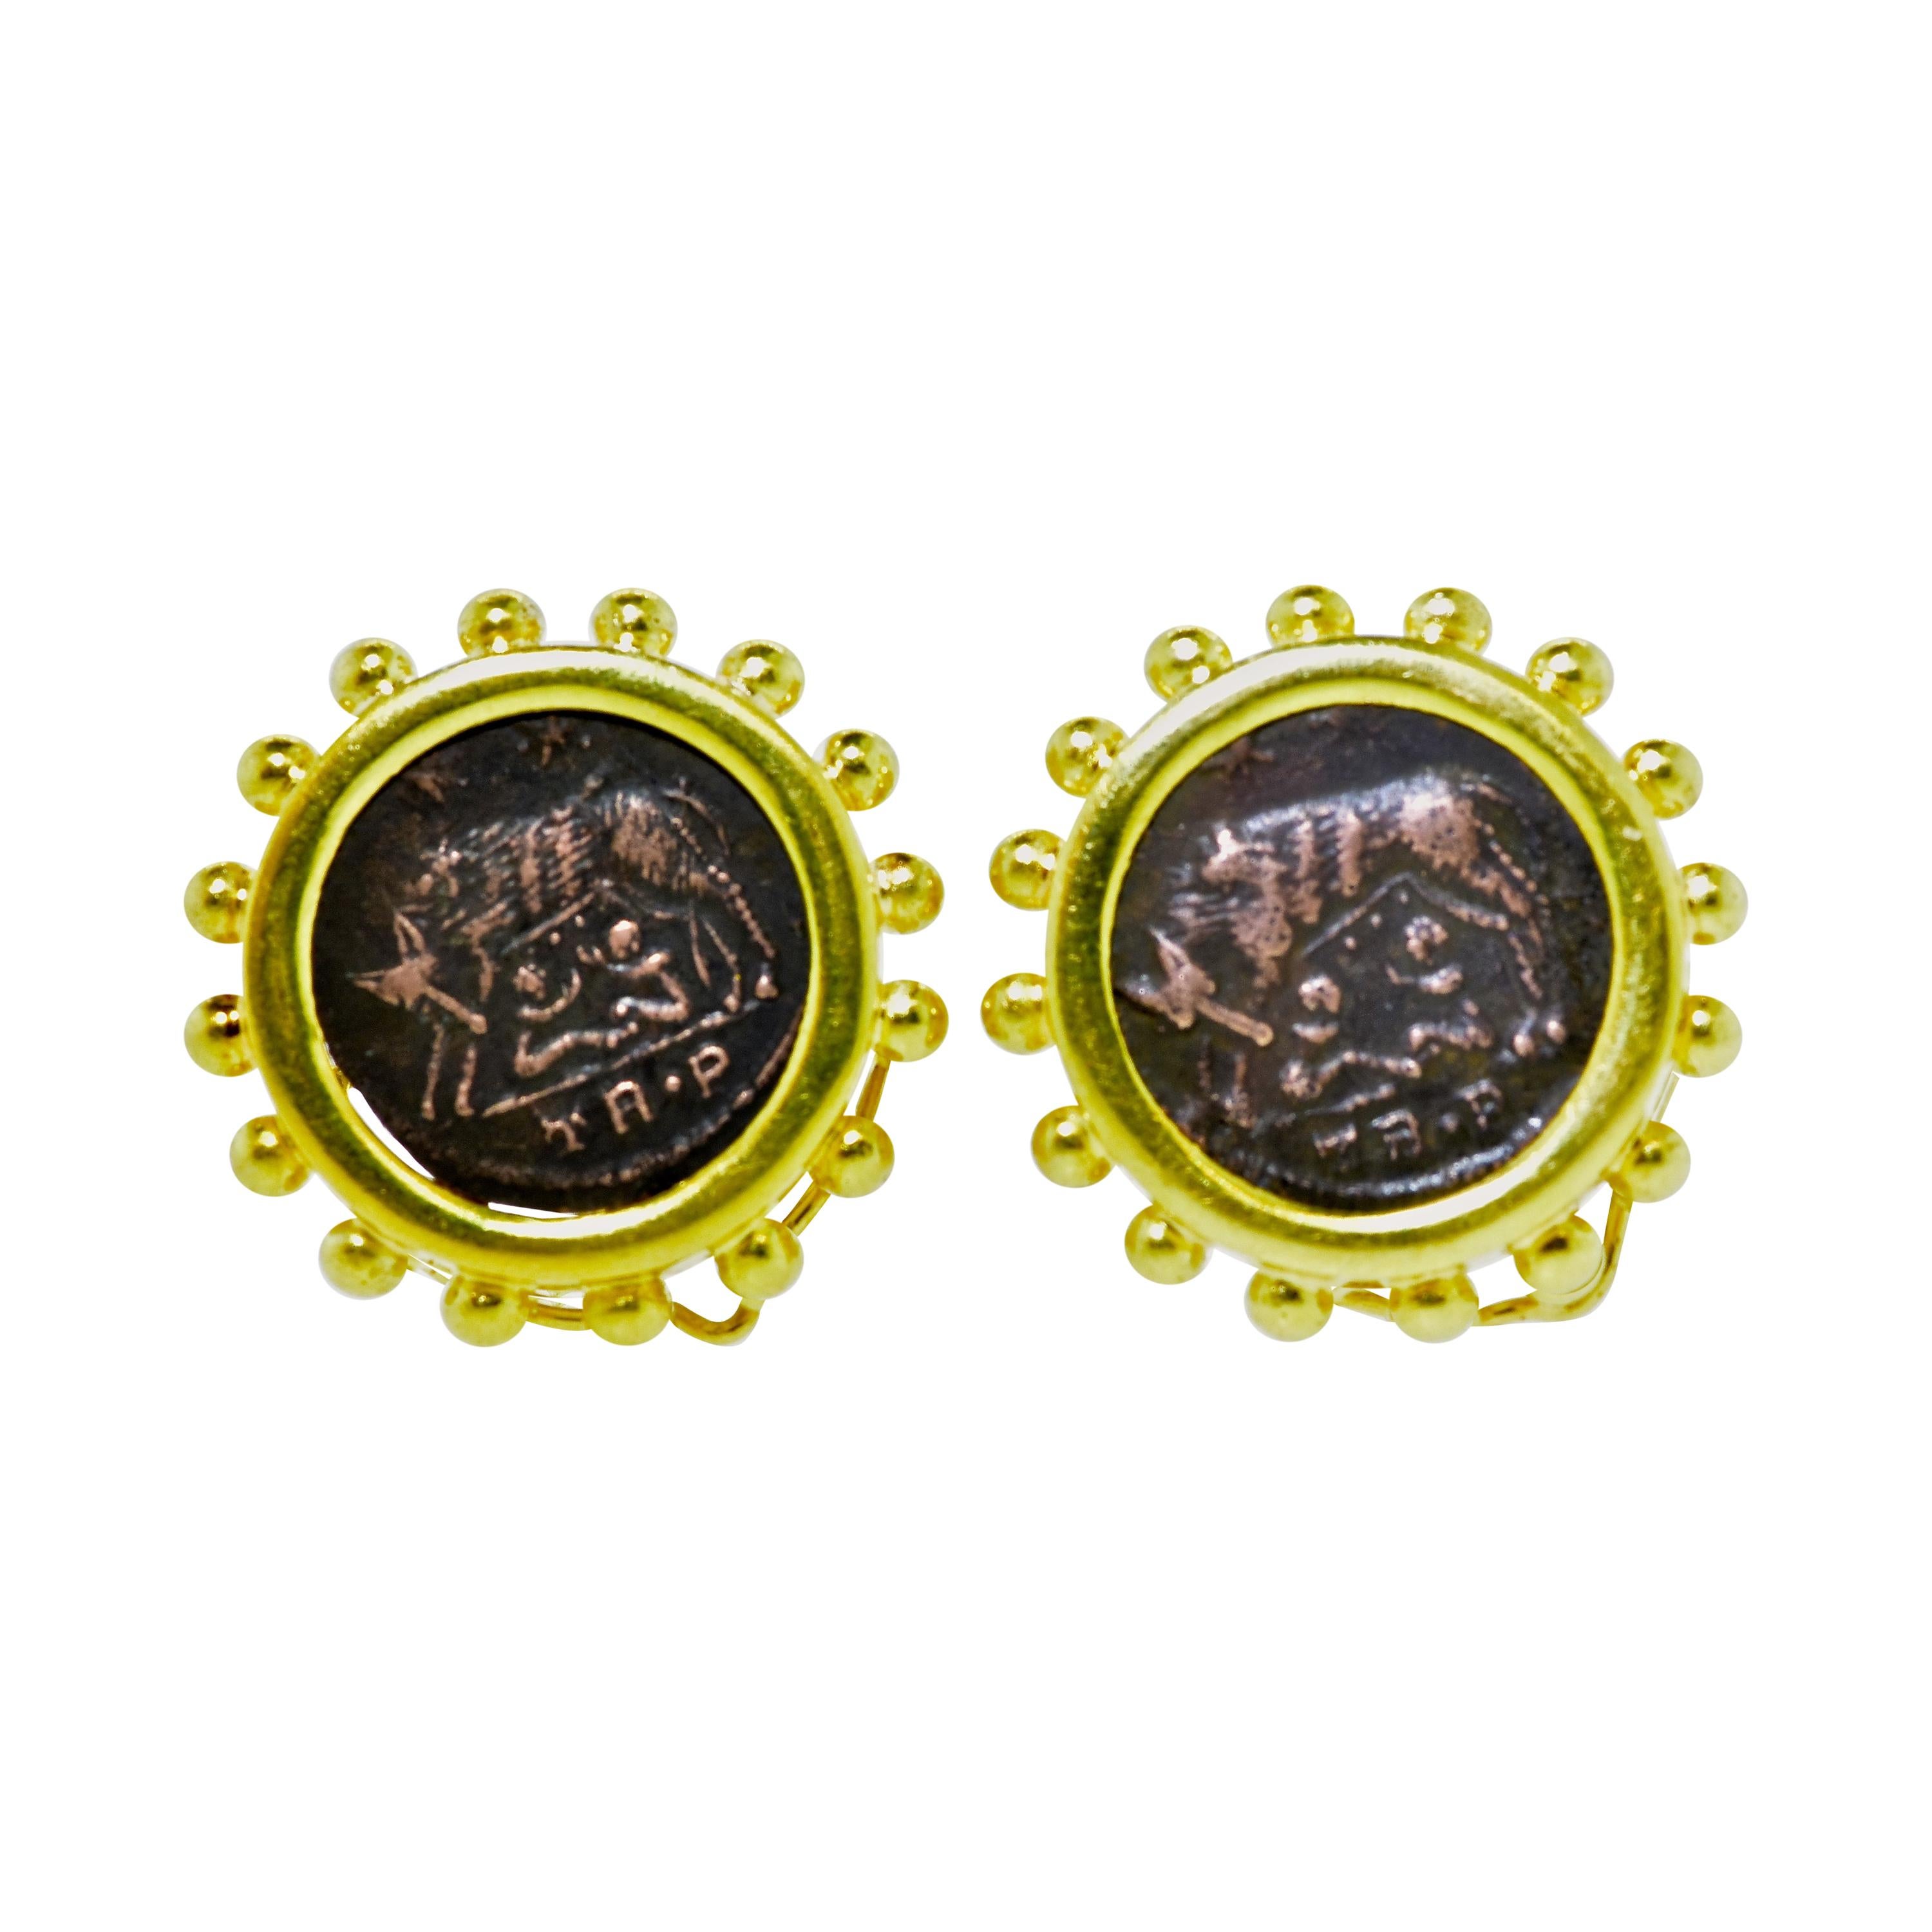 18K yellow gold earrings centering ancient coins depicting the she-wolf, Capitoline, suckling the mythical twin founders of Rome, Romulus and Remus.  These contemporary on the ear earrings are just under 1 inch in diameter.  The post is a flip up or